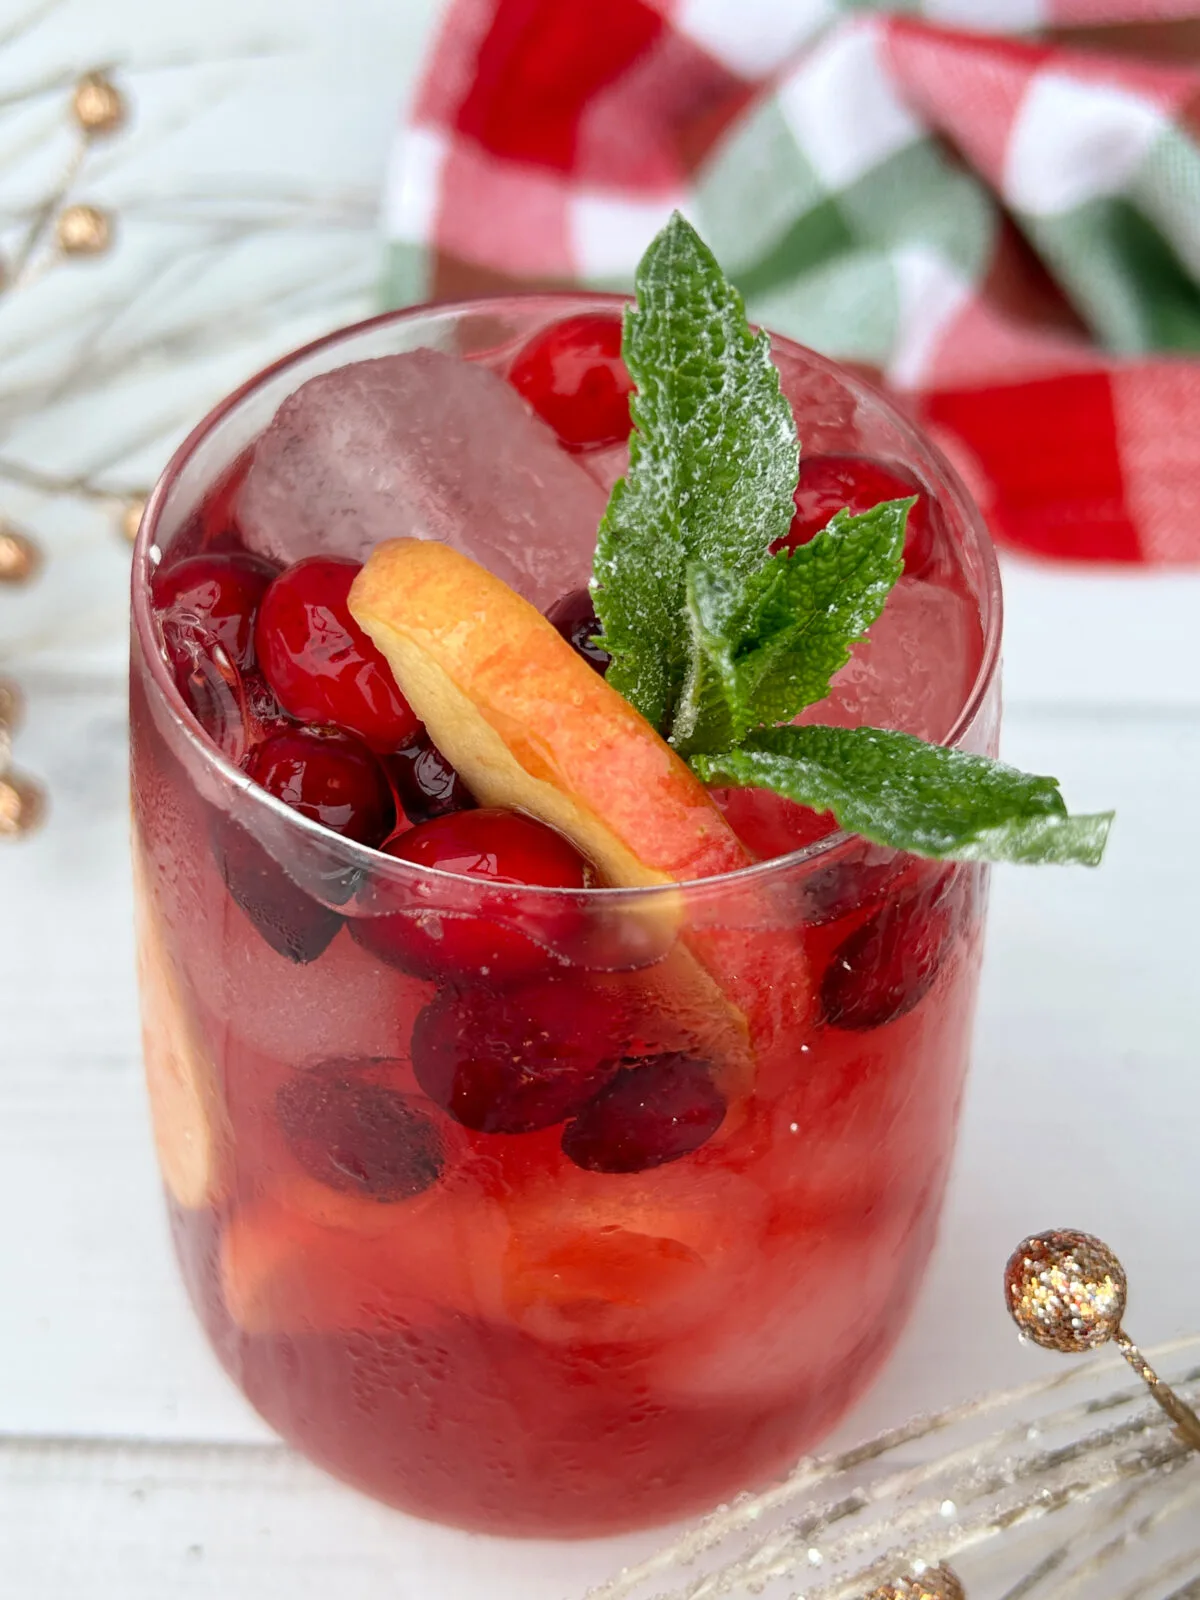 Looking for a perfect festive drink to serve this holiday season? Check out this easy, delicious recipe for Christmas bourbon punch!